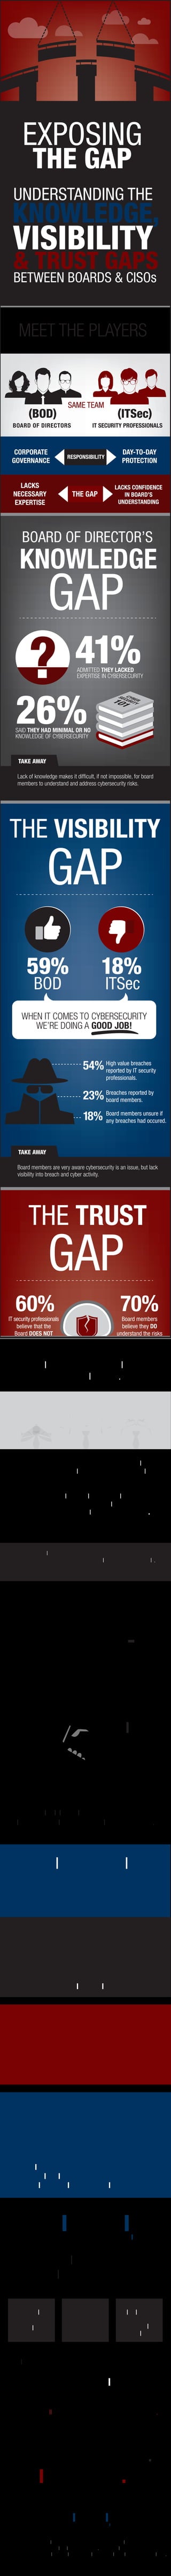 THE TRUST
GAP
THE VISIBILITY
GAP
TAKE AWAY
Board members are very aware cybersecurity is an issue, but lack
visibility into breach and cyber activity.
59%
BOD
18%
ITSec
WHEN IT COMES TO CYBERSECURITY
WE’RE DOING A GOOD JOB!
54%
23%
18%
High value breaches
reported by IT security
professionals.
Breaches reported by
board members.
Board members unsure if
any breaches had occured.
60%IT security professionals
believe that the
Board DOES NOT
understand the risks
70%Board members
believe they DO
understand the risks
MISMATCHED PERCEPTION
BREEDS MISTRUST.
79%
OF BOARD MEMBERS RATE THEIR OWN
EFFECTIVENESS OF CYBERSECURITY
GOVERNANCE AT A 7/10 OR BETTER
46%
OF IT SECURITY PROFESSIONALS RATE
THE BOARD’S EFFECTIVENESS OF
CYBERSECURITY GOVERNANCE AT A 4.5/10
TAKE AWAY
These issues lead to a breakdown of trust and communciation
between board members and their own IT security professionals.
TARGET’S BREACH
WAS A
WAKE-UP
CALL
BOTH GROUPS AGREE THAT THE TARGET BREACH
HAD A SIGNIFICANT IMPACT ON THE BOARD’S
INVOLVEMENT IN CYBERSECURITY GOVERNANCE.
AGREE
65% 67%
How Fidelis Cybersecurity
can help your organization:
Mitigate Your Risk Now.
SOLUTIONS TO BRIDGE
THE GAP
ADD CYBERSECURITY ADVISOR TO BOARD
EDUCATE THE BOARD
INCREASE TRANSPARENCY AND
COMMUNICATION BETWEEN THE BOARD AND
IT SECURITY PROFESSIONALS
PROACTIVE
DEFENSE
SERVICES
ADVANCED
THREAT
DEFENSE
INCIDENT
RESPONSE
FORENSIC
SERVICES
ﬁdelissecurity.com
SOURCE: CYBERSECURITY GOVERNANCE AND THE BOARD OF DIRECTORS,
CONDUCTED BY PONEMON INSTITUTE, OCT 2014. SAMPLE SIZE: MORE THAN 650
BOARD MEMBERS AND IT SECURITY PROFESSIONALS (MAINLY CIOS, CTOS AND CISOS).
CORPORATE
GOVERNANCE
DAY-TO-DAY
PROTECTION
LACKS
NECESSARY
EXPERTISE
LACKS CONFIDENCE
IN BOARD’S
UNDERSTANDING
RESPONSIBILITY
THE GAP
MEET THE PLAYERS
(BOD) (ITSec)
BOARD OF DIRECTORS IT SECURITY PROFESSIONALS
BOARD OF DIRECTOR’S
KNOWLEDGE
GAP
41%ADMITTED THEY LACKED
EXPERTISE IN CYBERSECURITY
26%SAID THEY HAD MINIMAL OR NO
KNOWLEDGE OF CYBERSECURITY
TAKE AWAY
Lack of knowledge makes it difﬁcult, if not impossible, for board
members to understand and address cybersecurity risks.
SAME TEAM
BOD ITSec
DOWNLOAD OUR WHITEPAPER
To learn more about bridging the gap in your organization:
Follow our cybersecurity discussion on Twitter.
#ExposeTheGap
CYBER
SECURITY101
EXPOSING
THE GAP
BETWEEN BOARDS & CISOs
VISIBILITY
UNDERSTANDING THE
KNOWLEDGE,
& TRUST GAPS
 